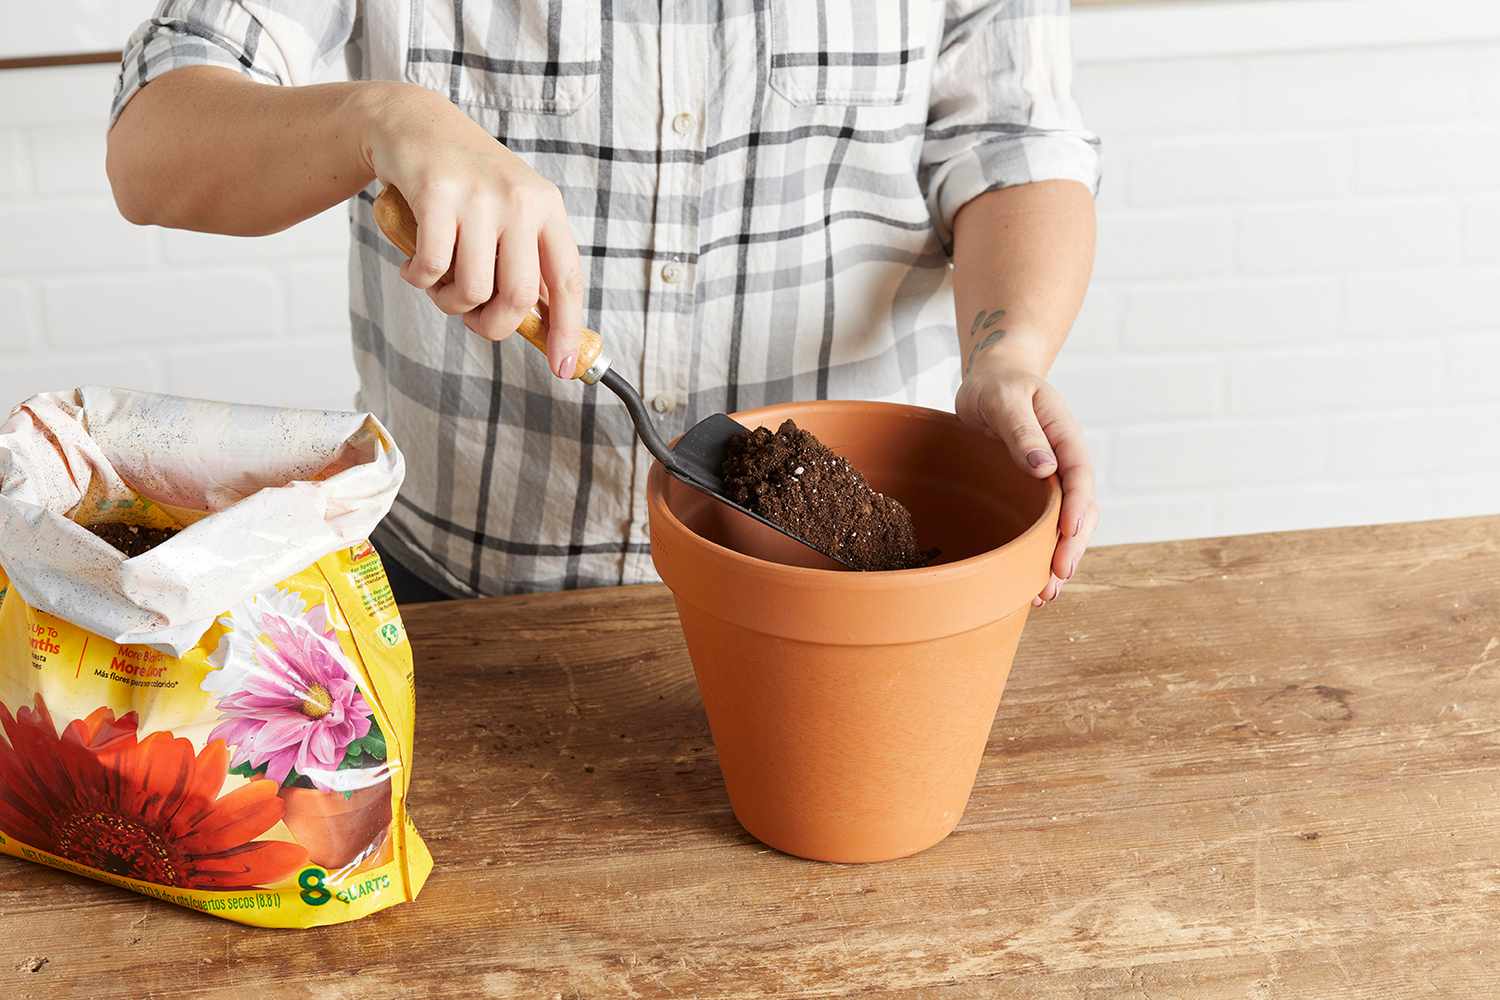 person using shovel to scoop soil from bag into terra cotta pot